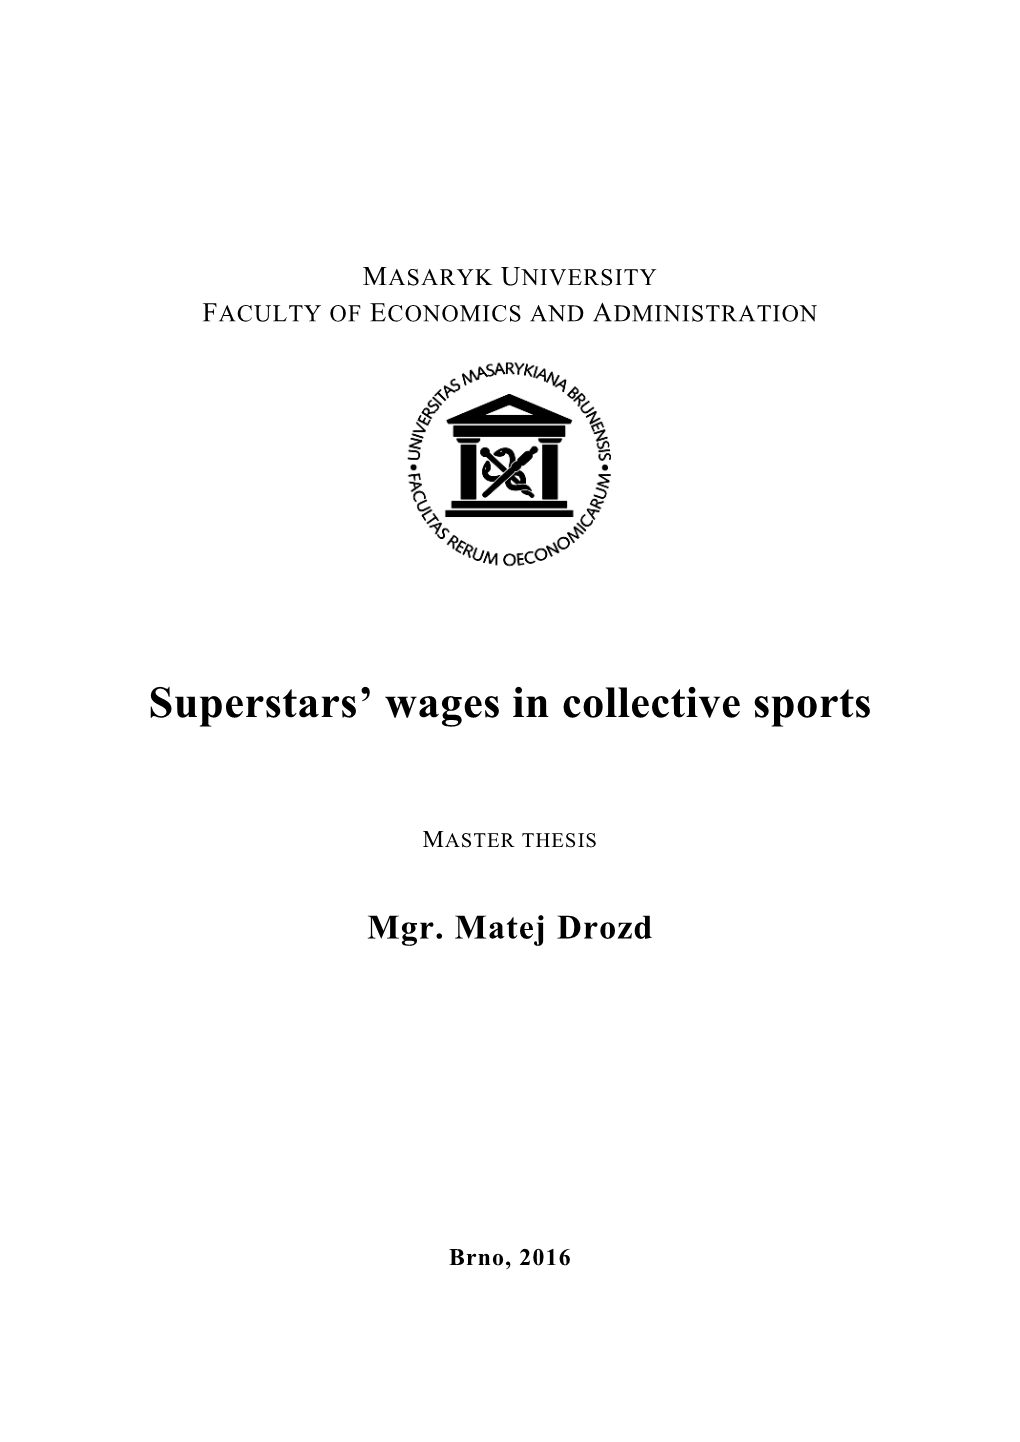 Superstars' Wages in Collective Sports